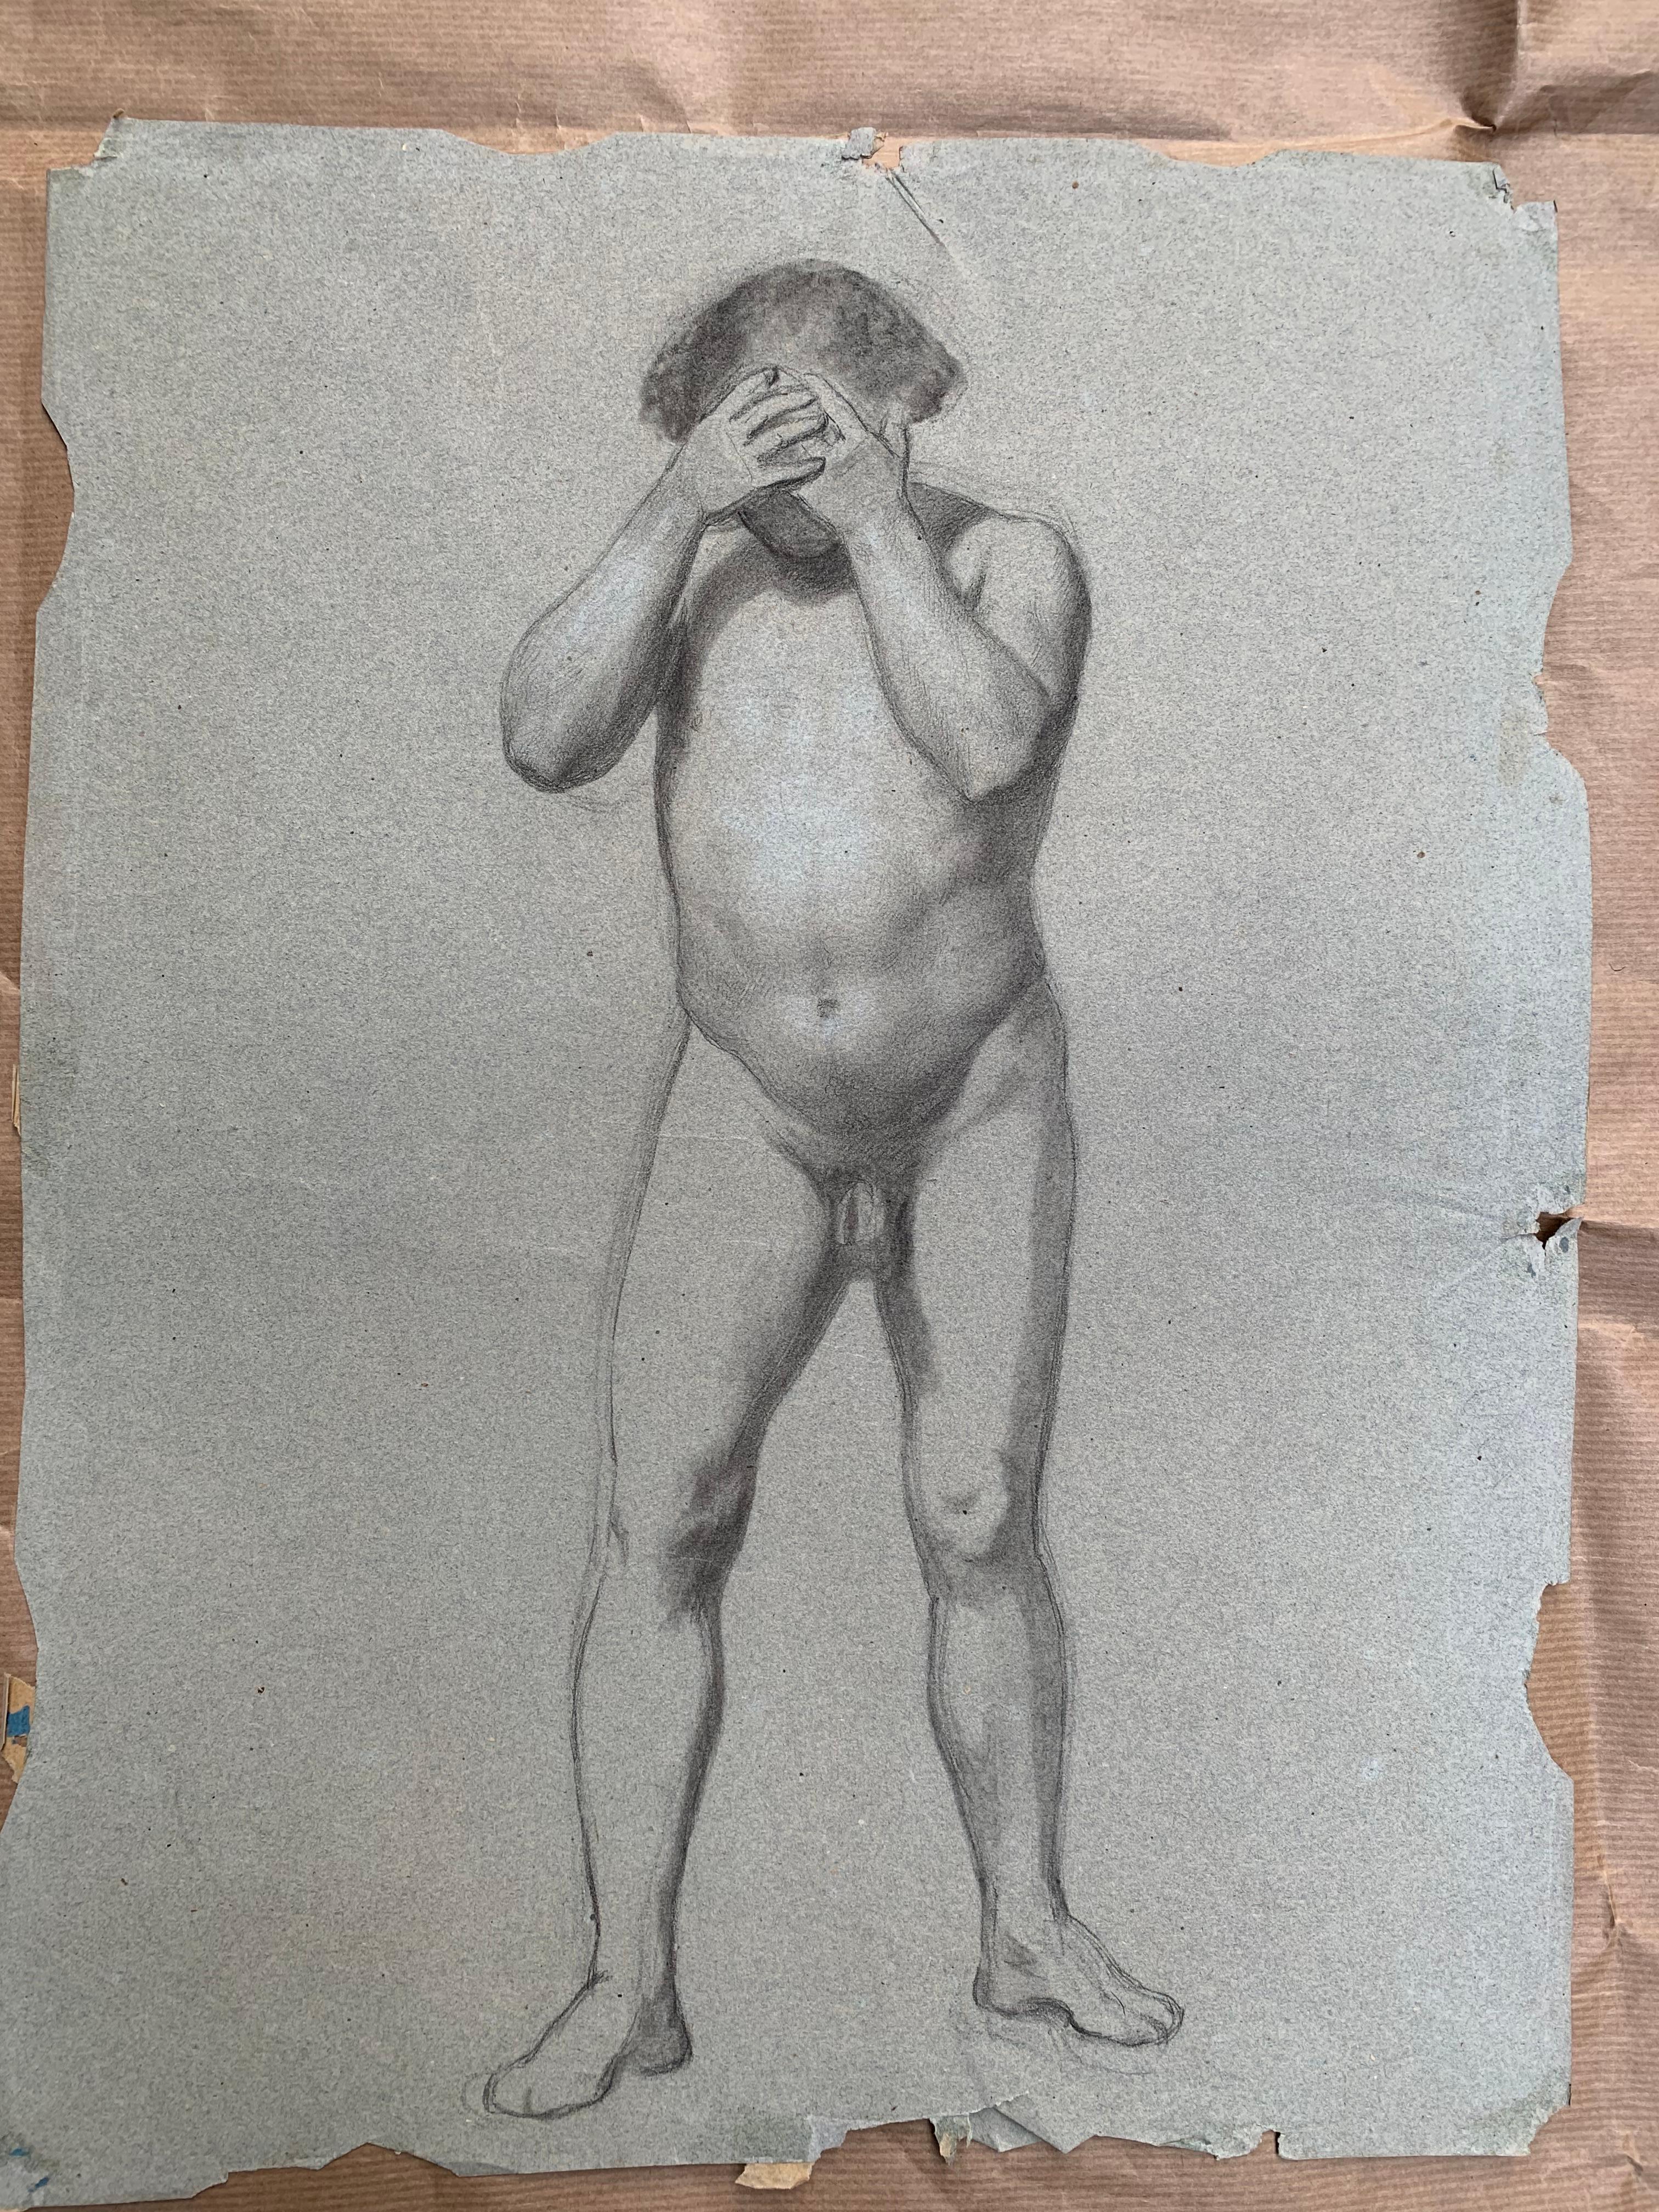 Preparatory anatomical study for the figure of a man with hands on his face. For Sale 6